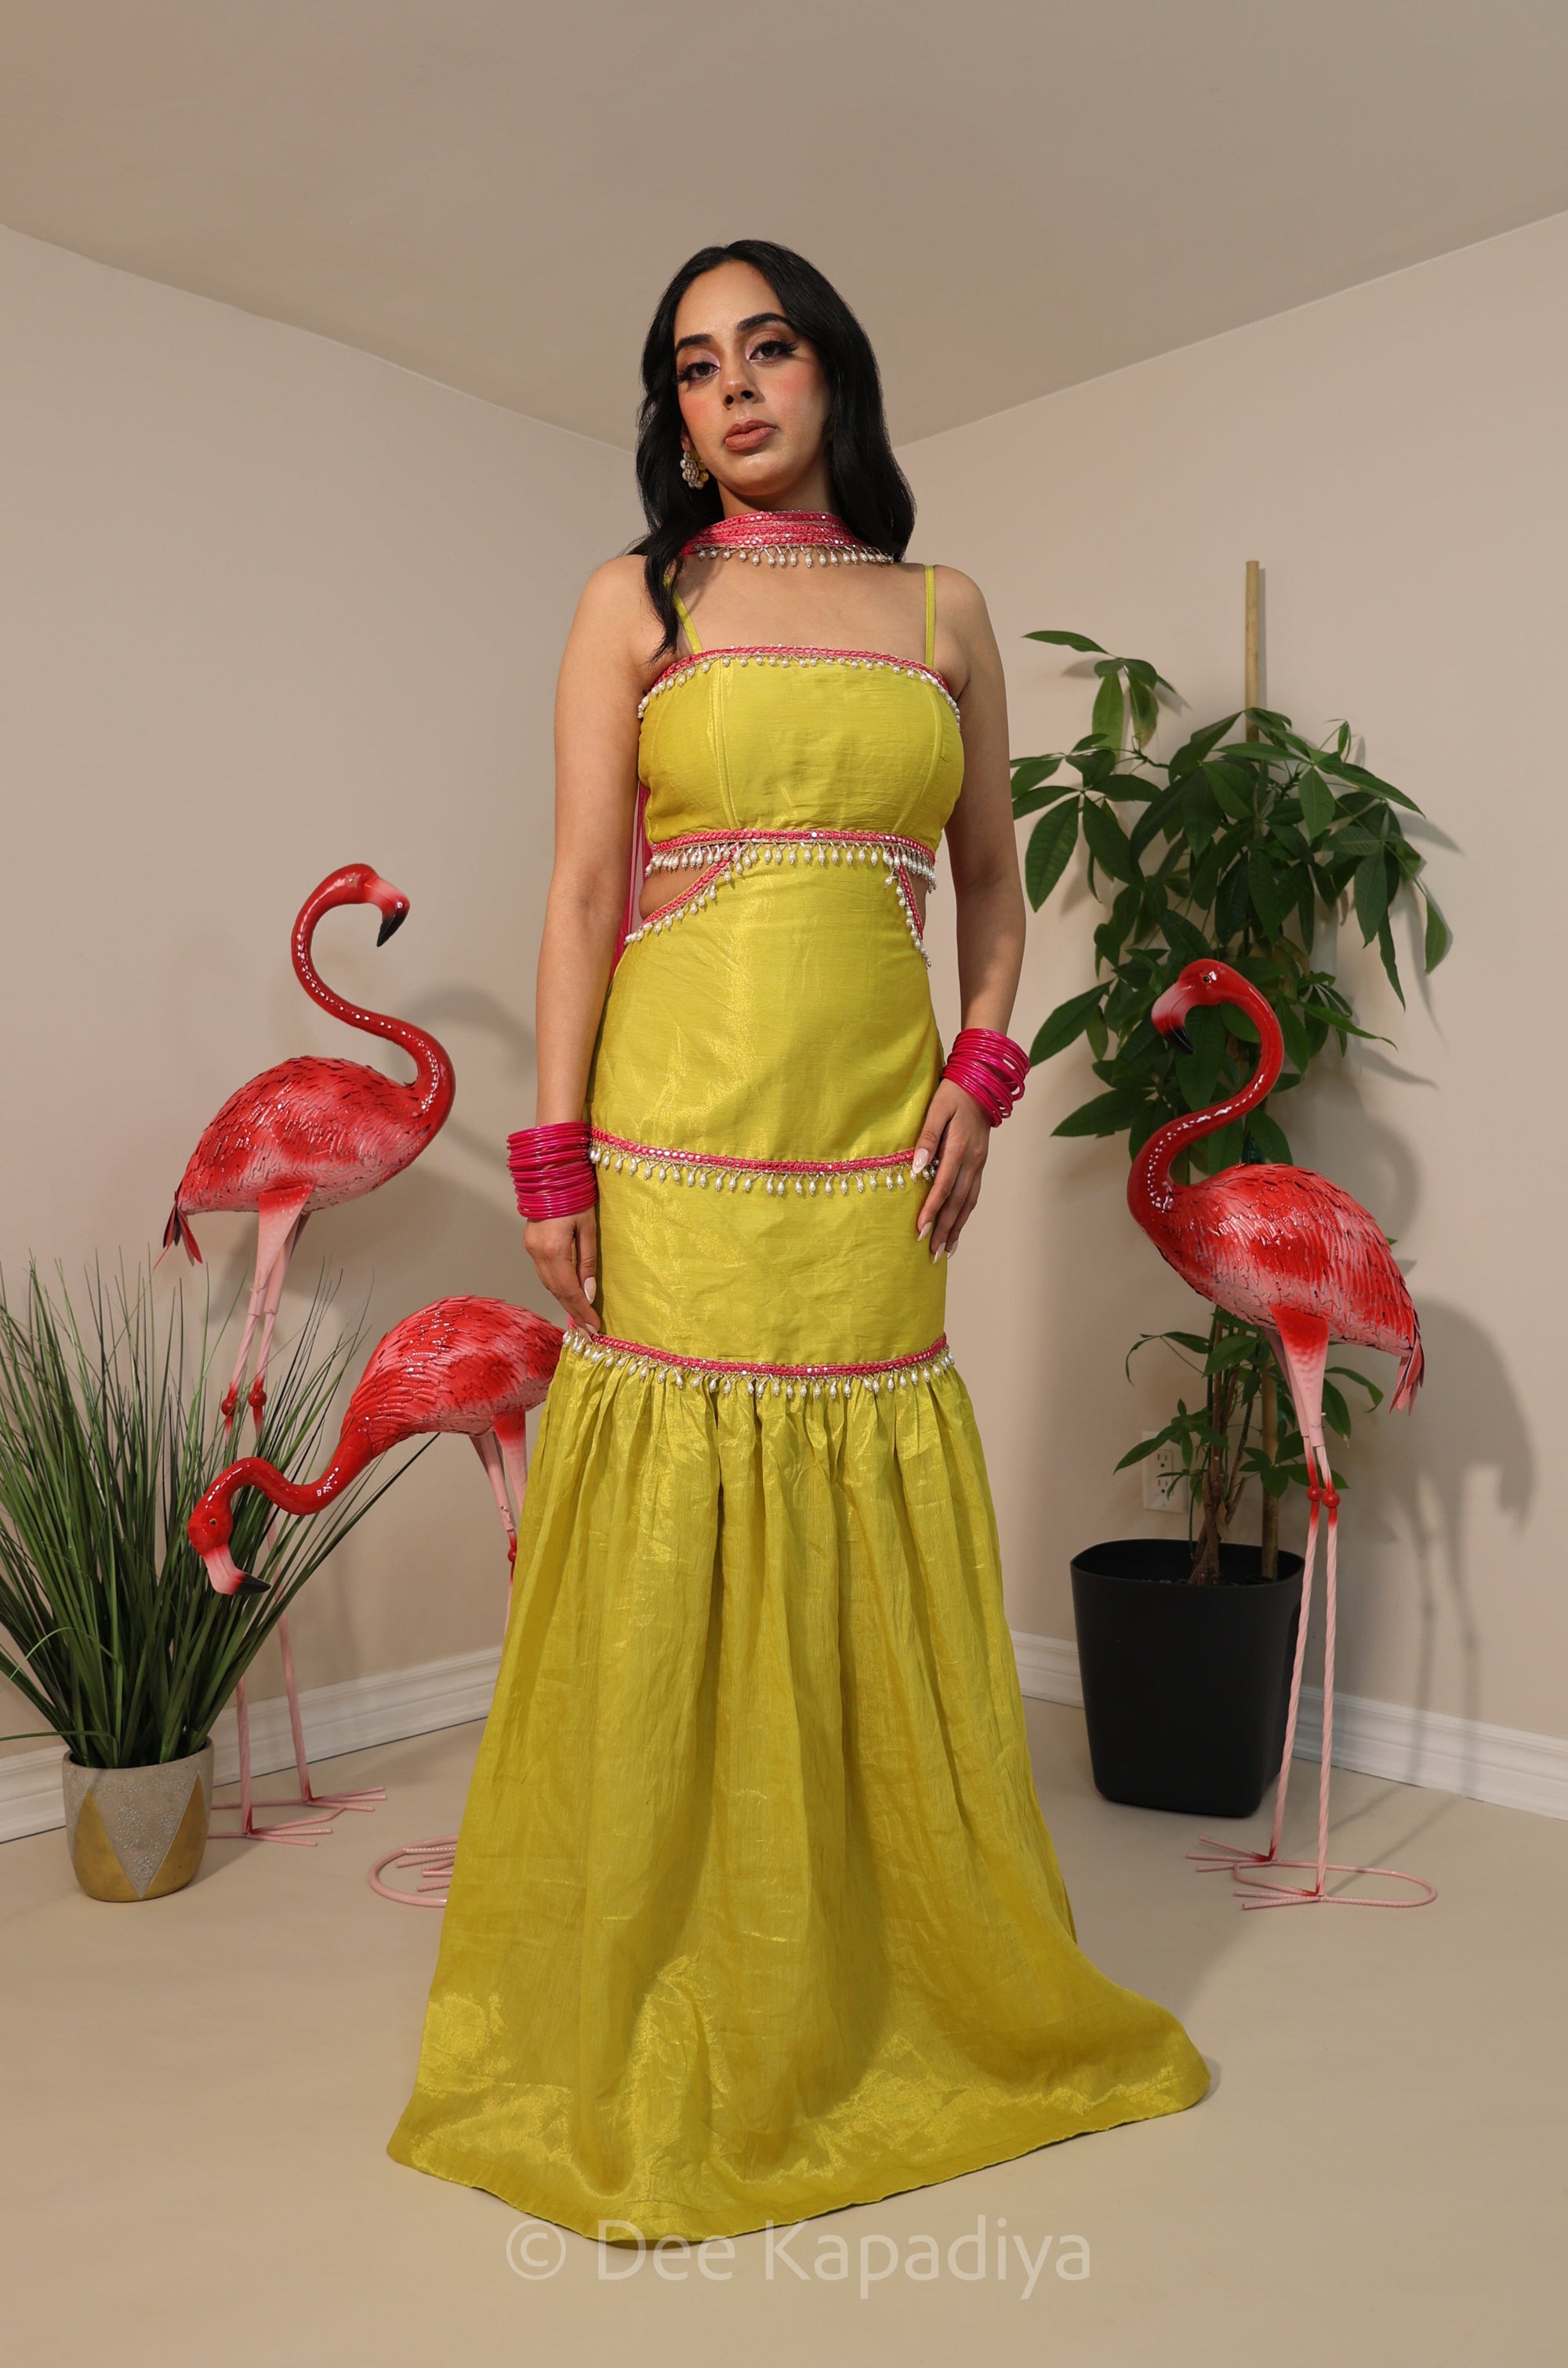 Shanti from Om Shanti Om, elegant and sophisticated neon yellow and hot pink combo dress lehenga set perfect for haldi and mehendi event. 